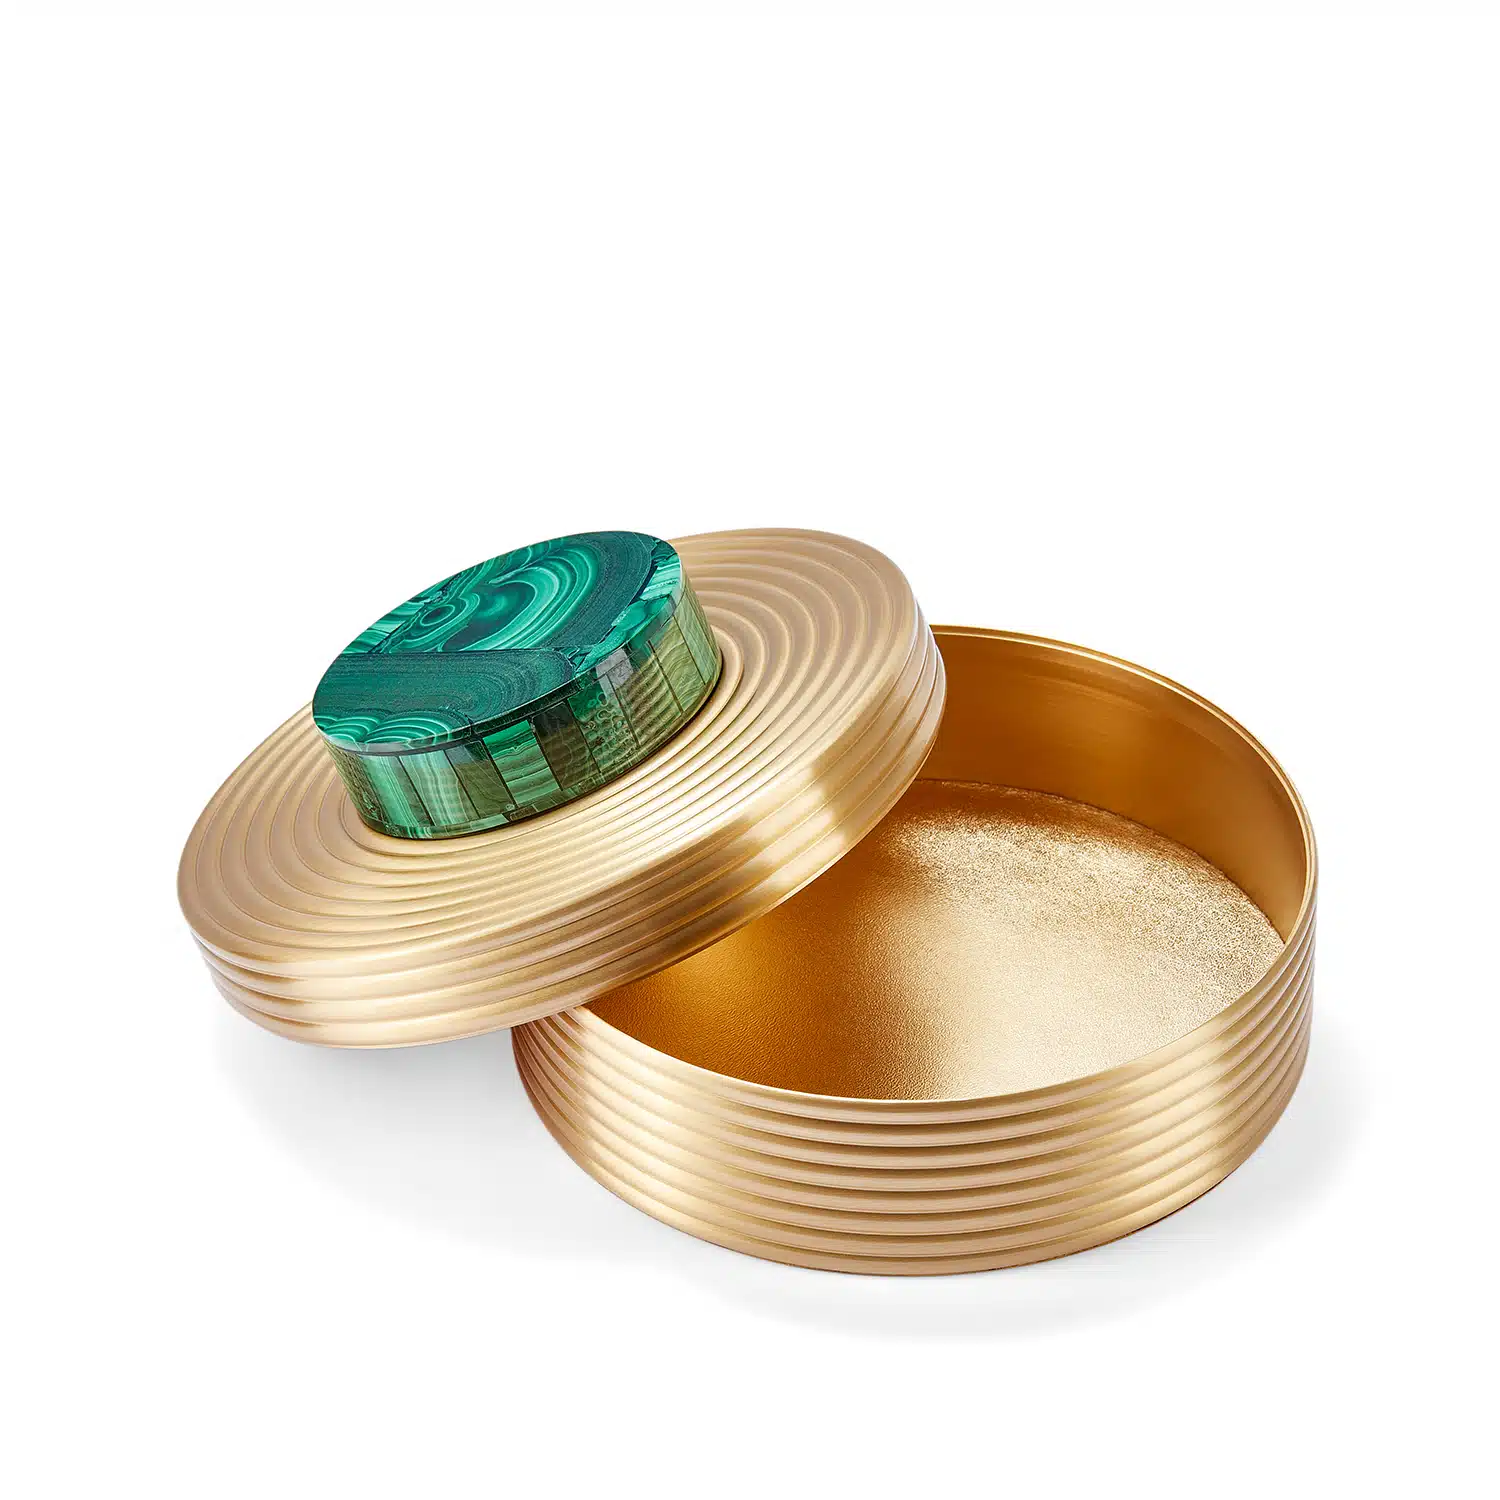 A luxury keepsake box in gold with a malachite mineral on top, by the katharine pooley boutique